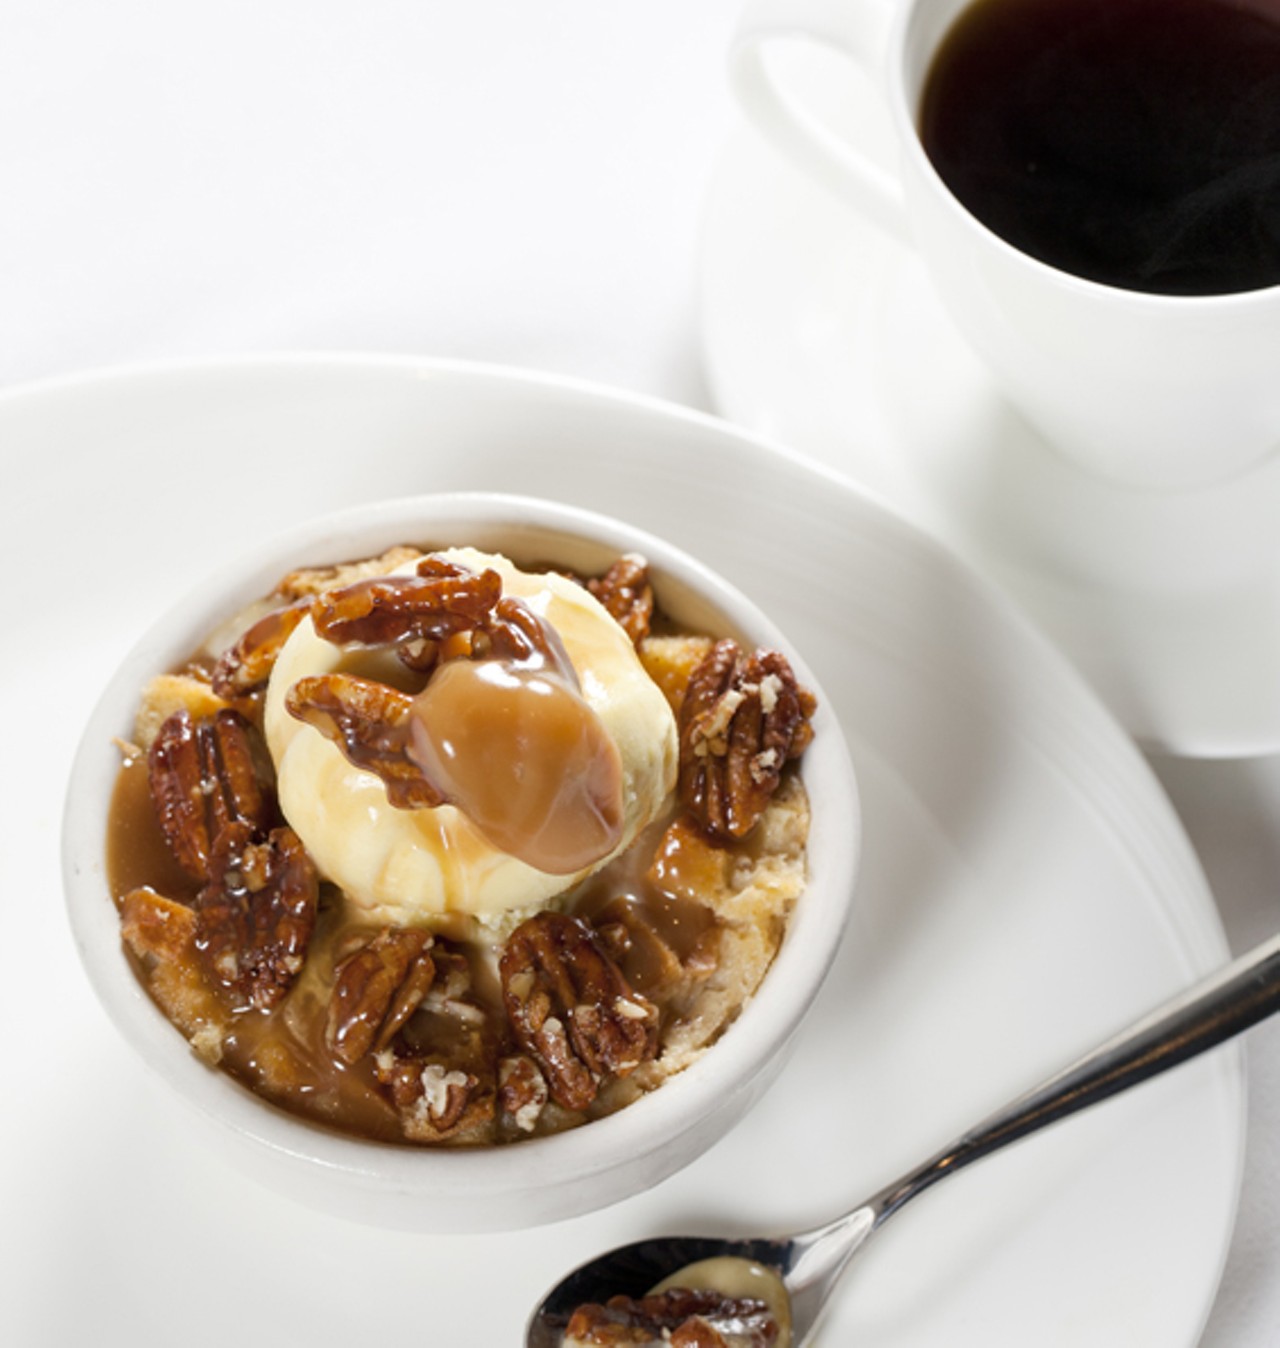 For dessert, "my grandma's bread pudding" with vanilla and caramel.